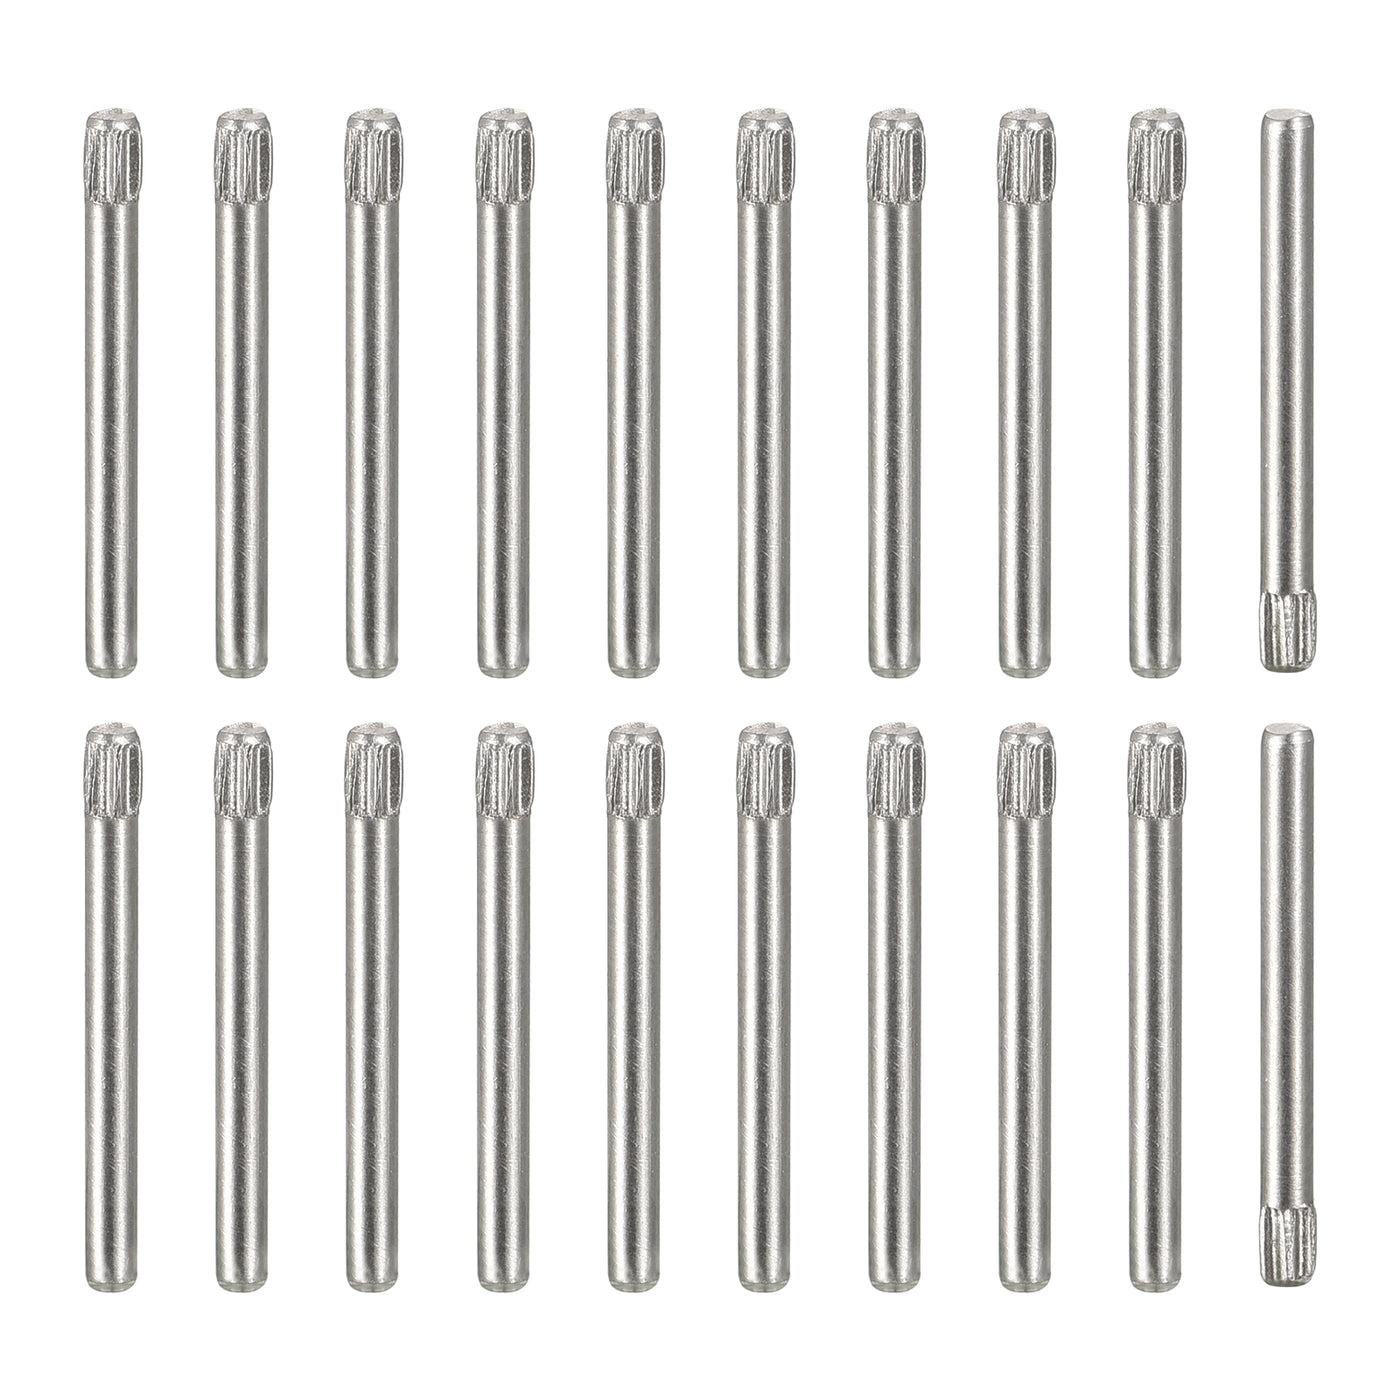 uxcell Uxcell 1.5x16mm 304 Stainless Steel Dowel Pins, 20Pcs Knurled Head Flat End Dowel Pin